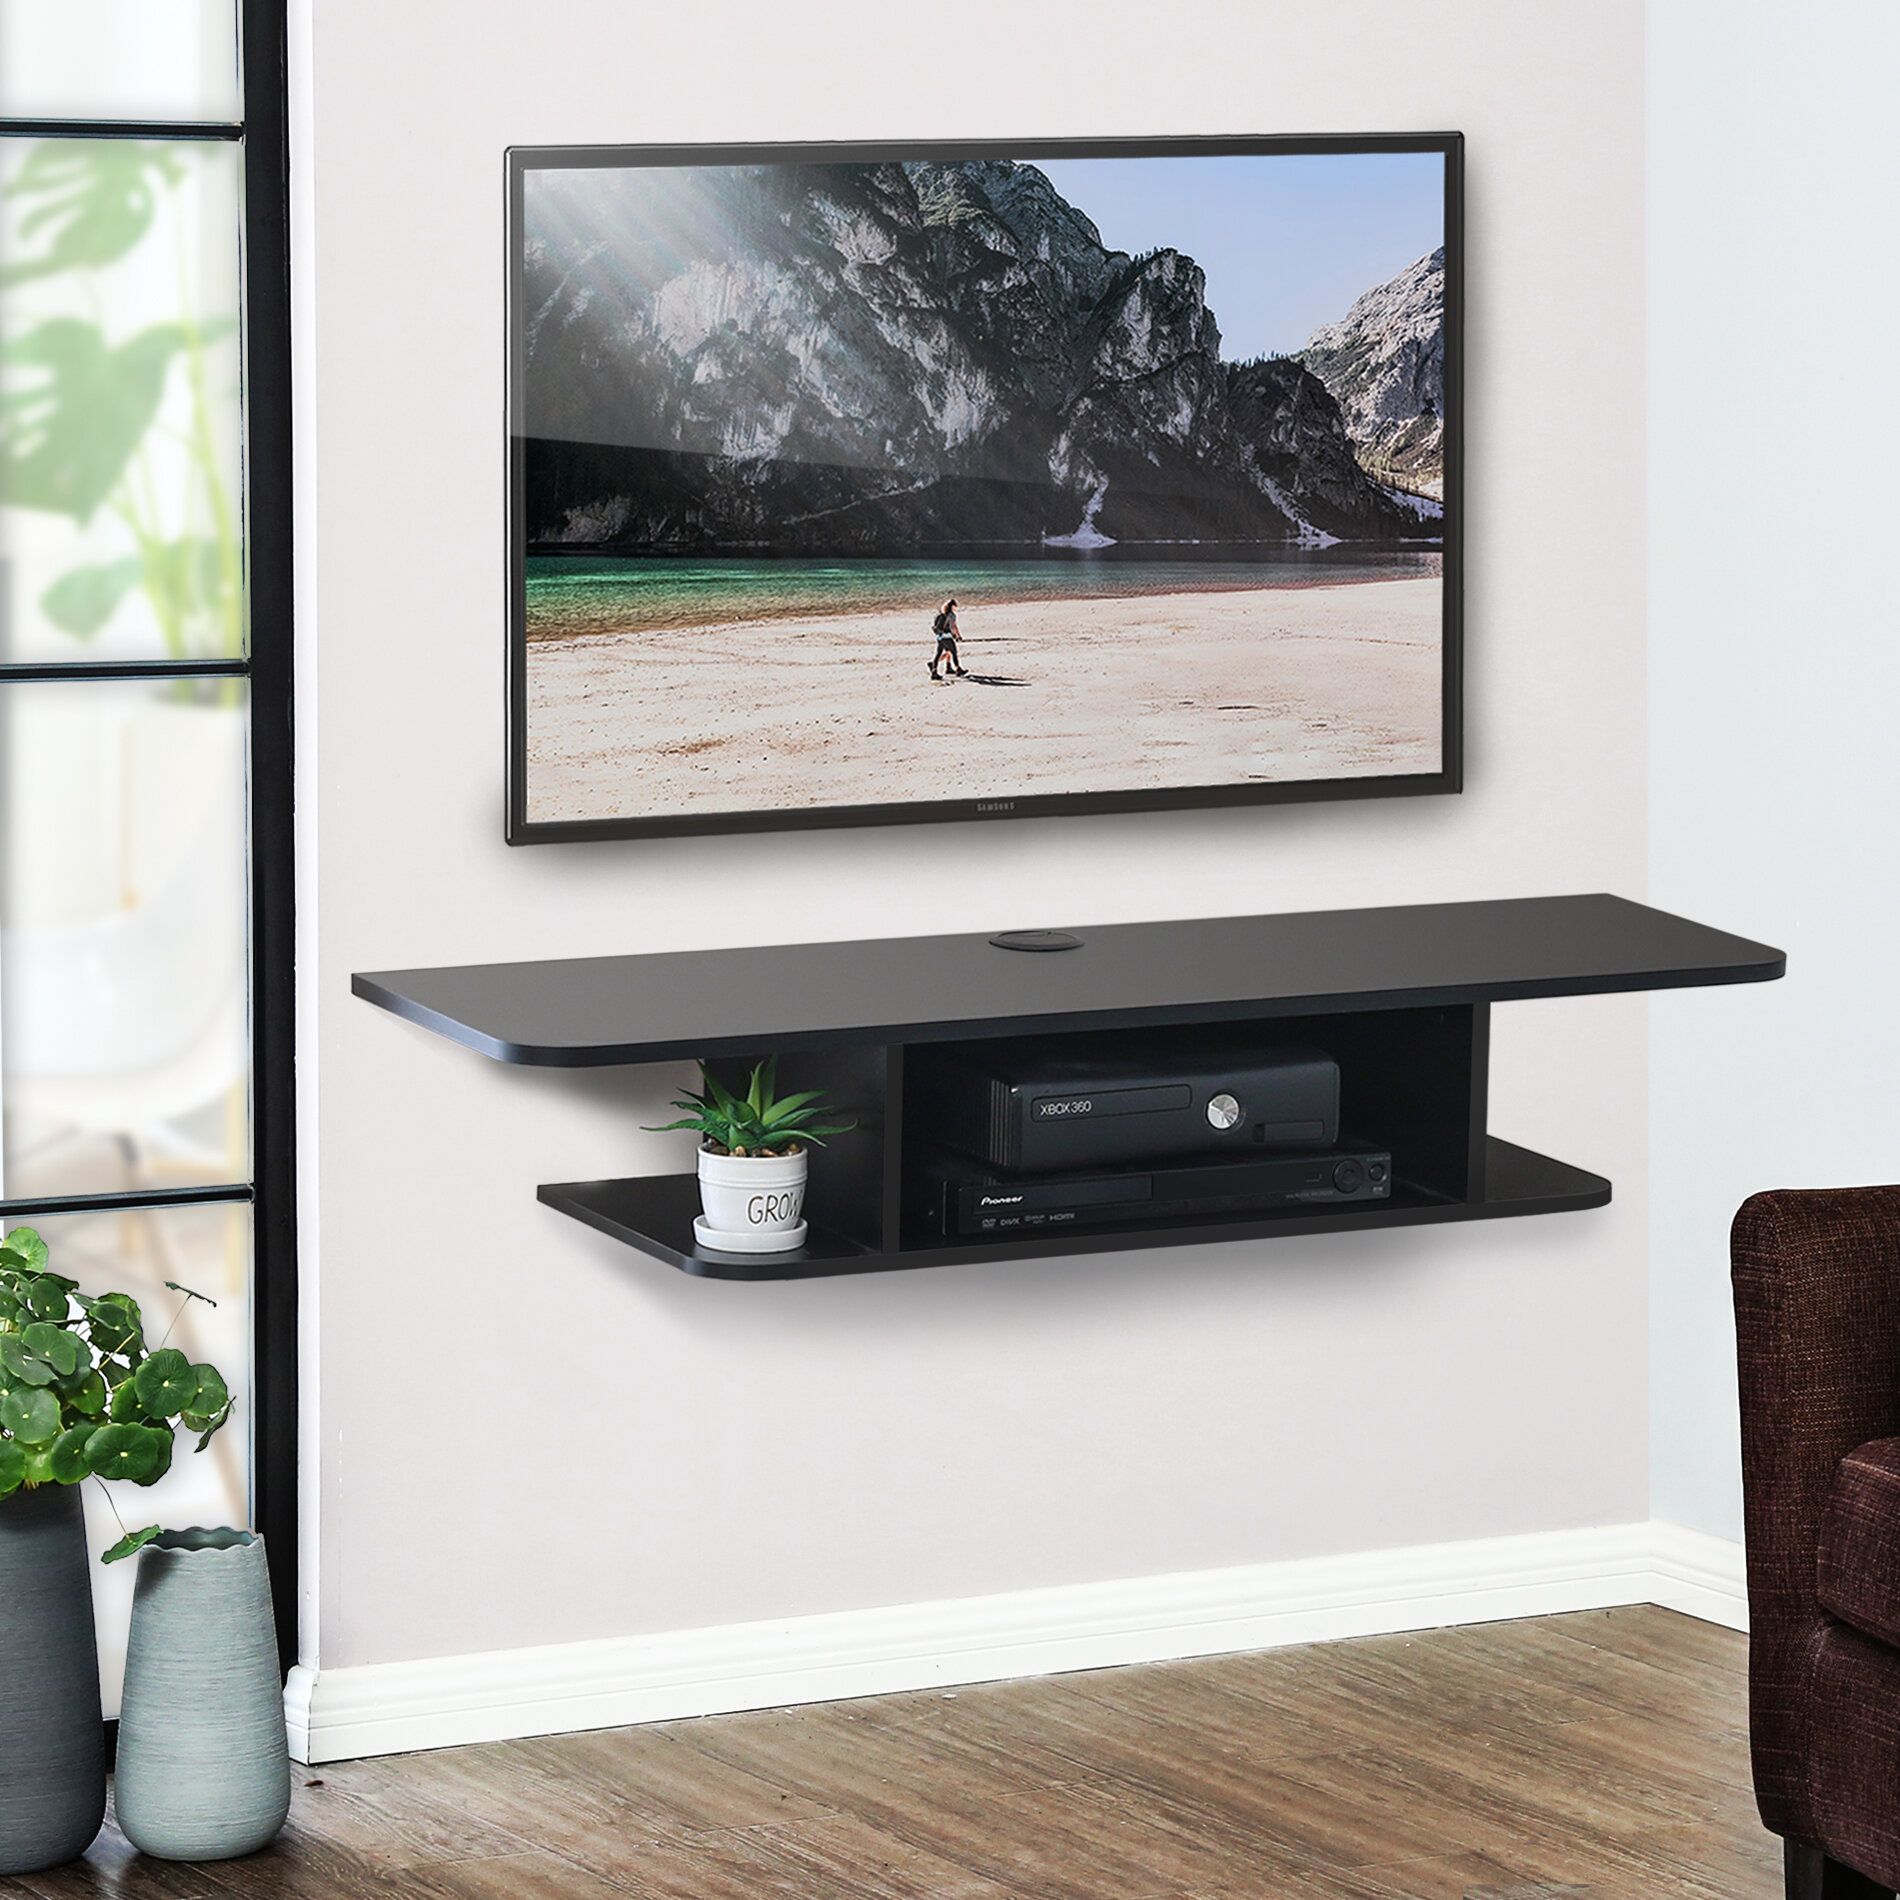 Floating Small Tv Stands & Entertainment Centers You'll Love In 2021 Pertaining To Top Shelf Mount Tv Stands (Gallery 13 of 20)